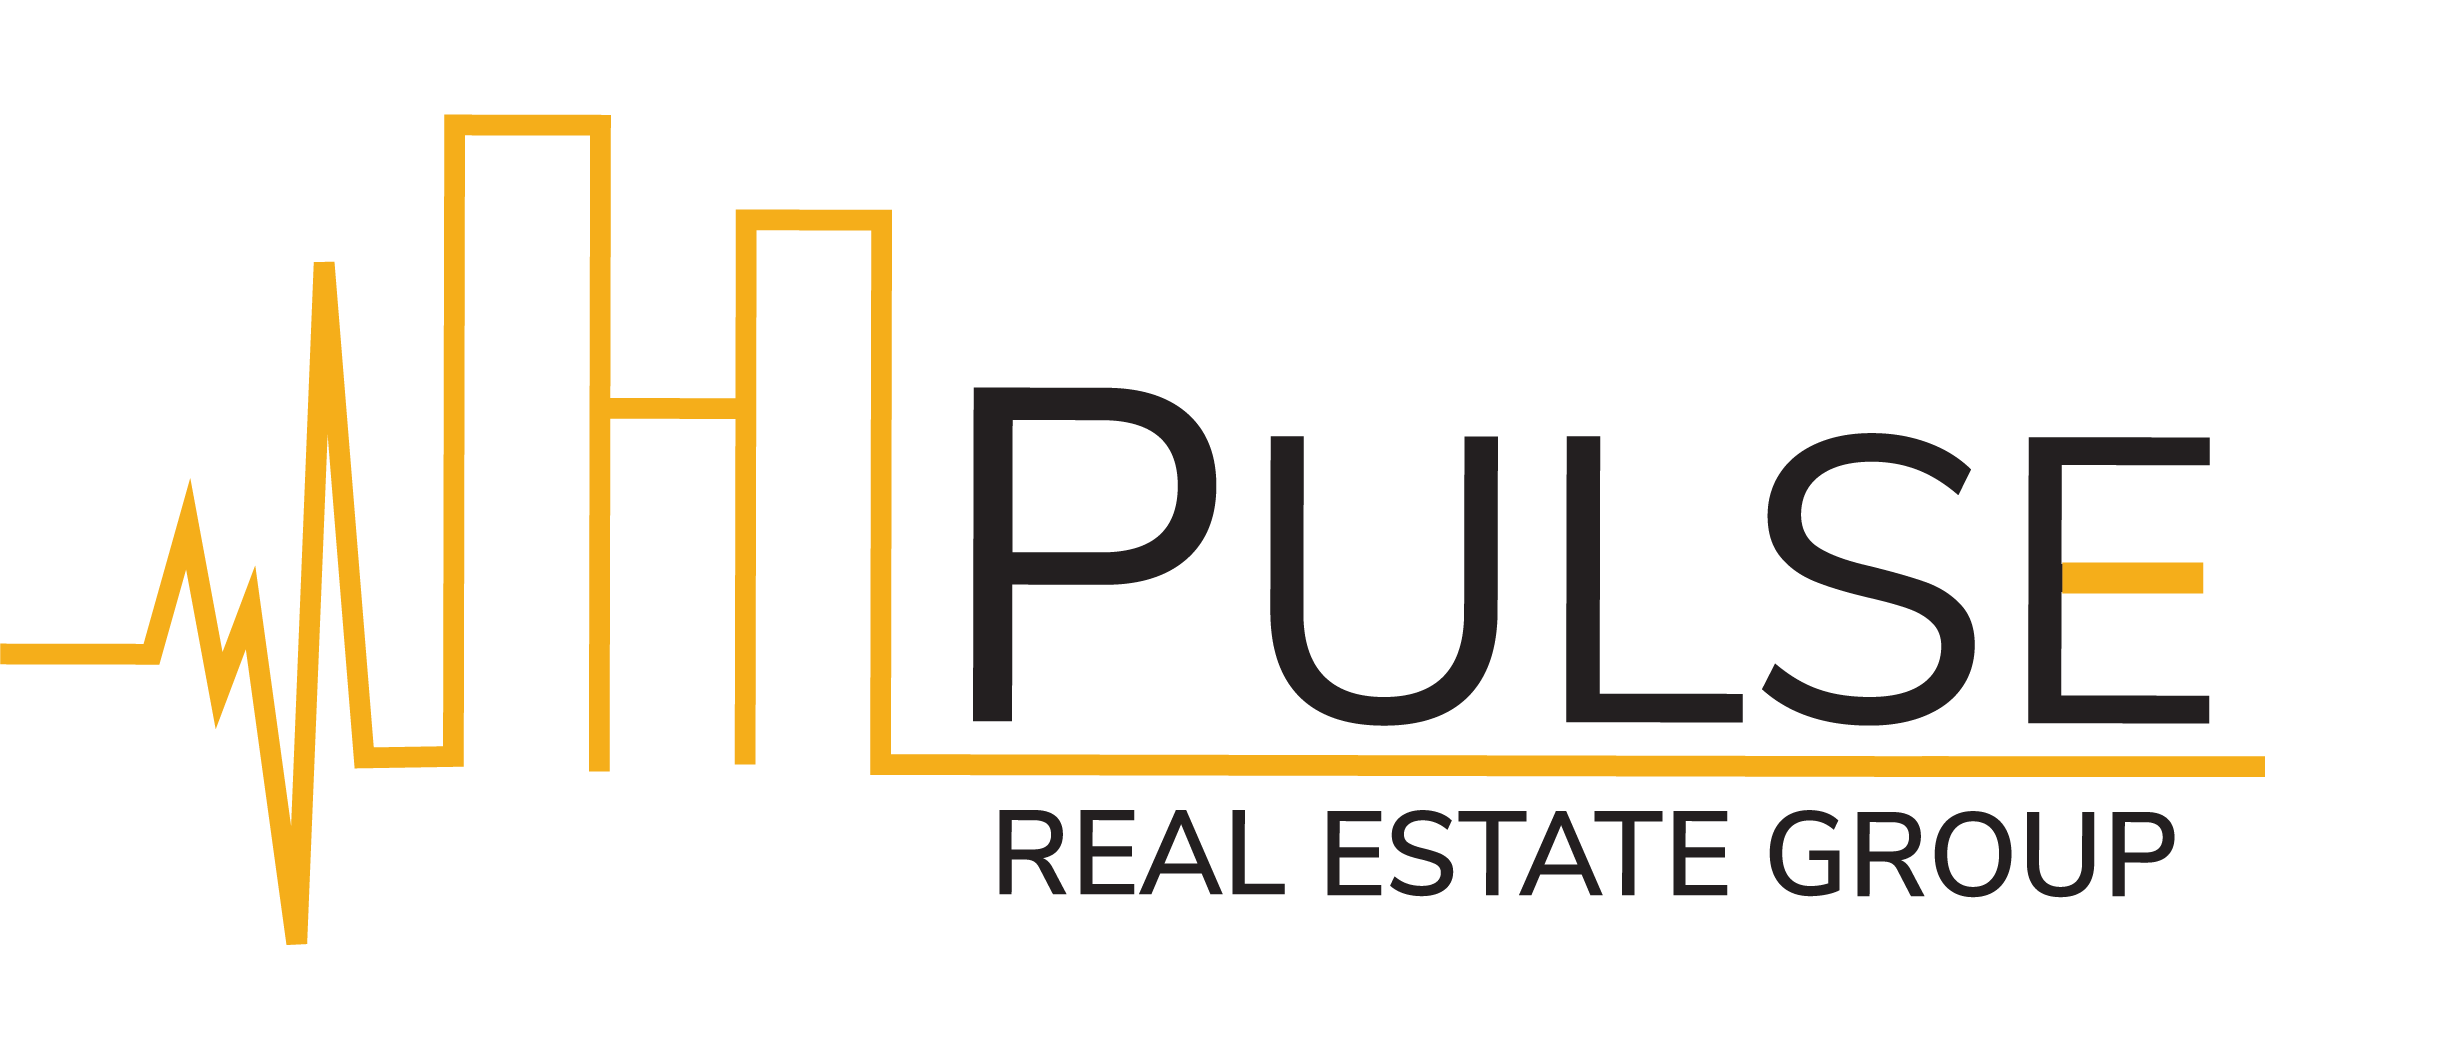 PULSE Real Estate Group